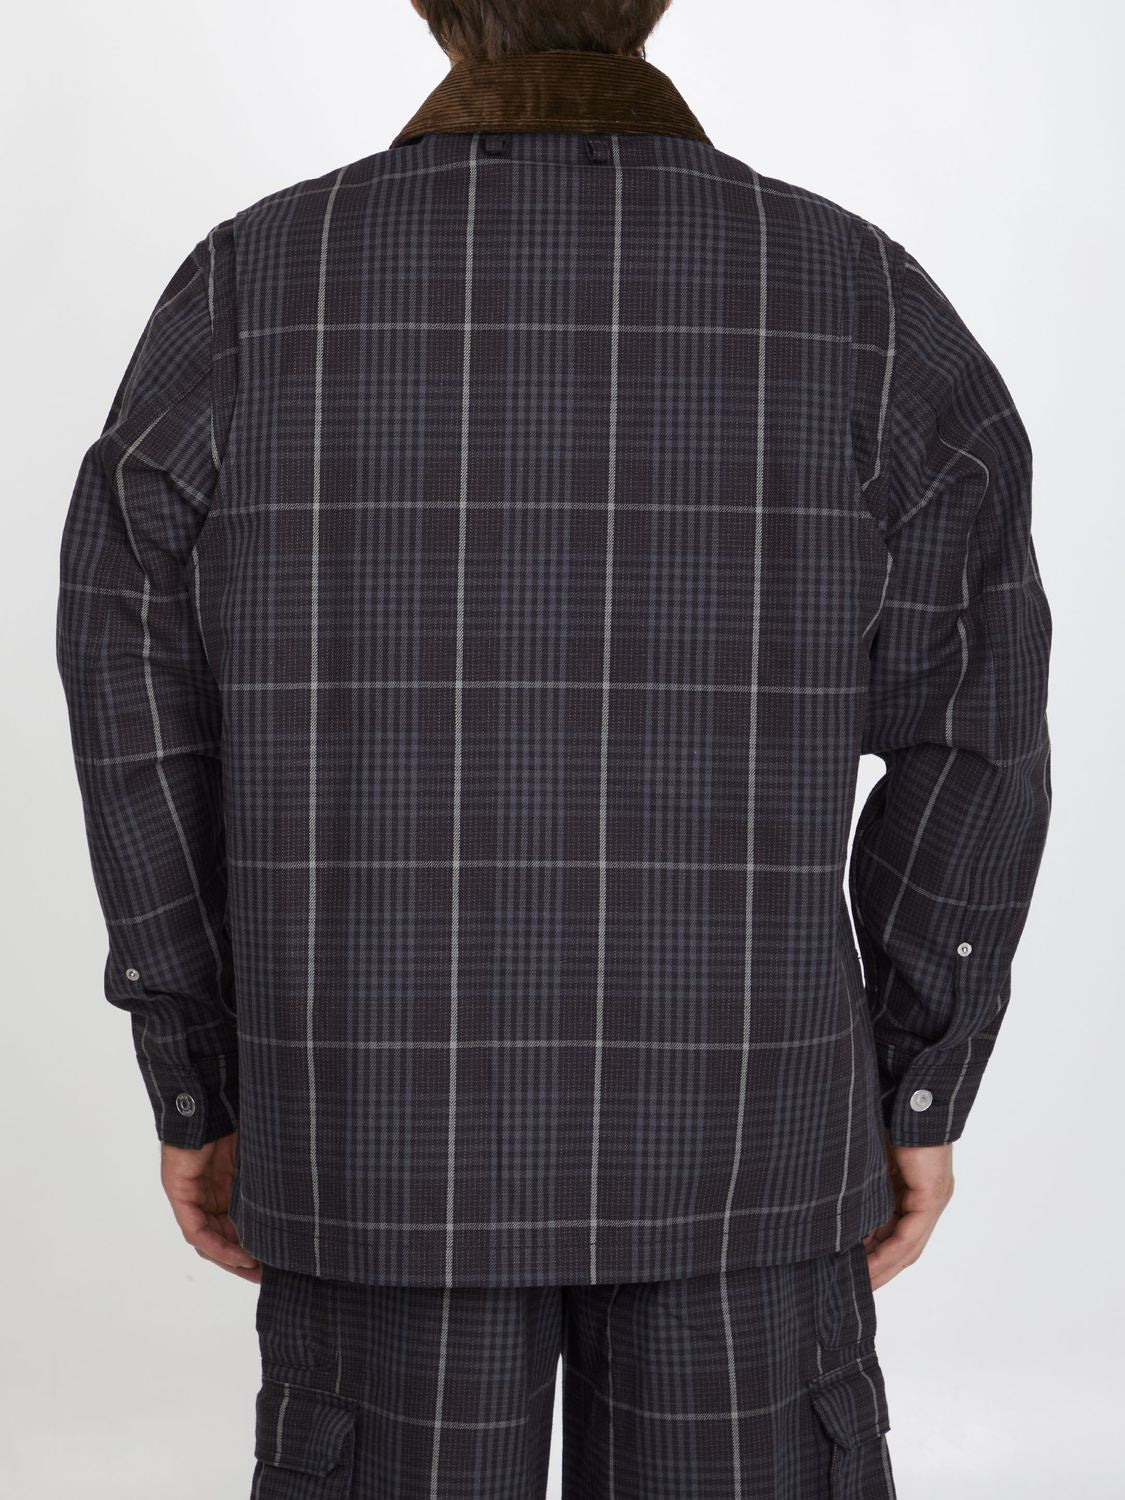 DIOR HOMME Men's Brown Checked Cotton Jacqaurd Jacket for FW23